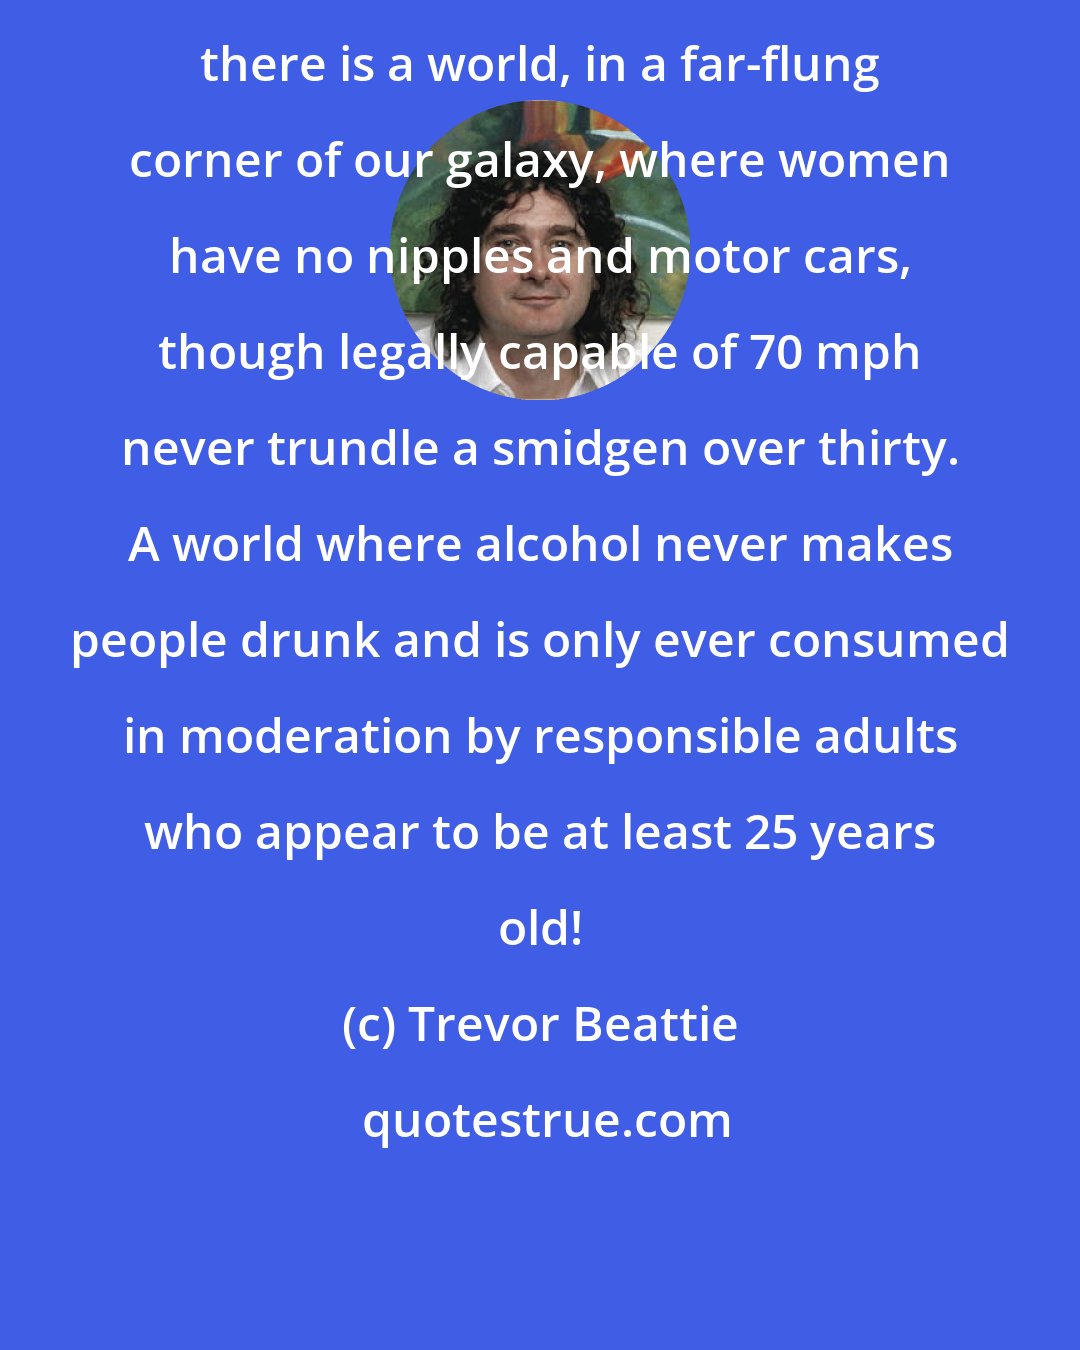 Trevor Beattie: there is a world, in a far-flung corner of our galaxy, where women have no nipples and motor cars, though legally capable of 70 mph never trundle a smidgen over thirty. A world where alcohol never makes people drunk and is only ever consumed in moderation by responsible adults who appear to be at least 25 years old!